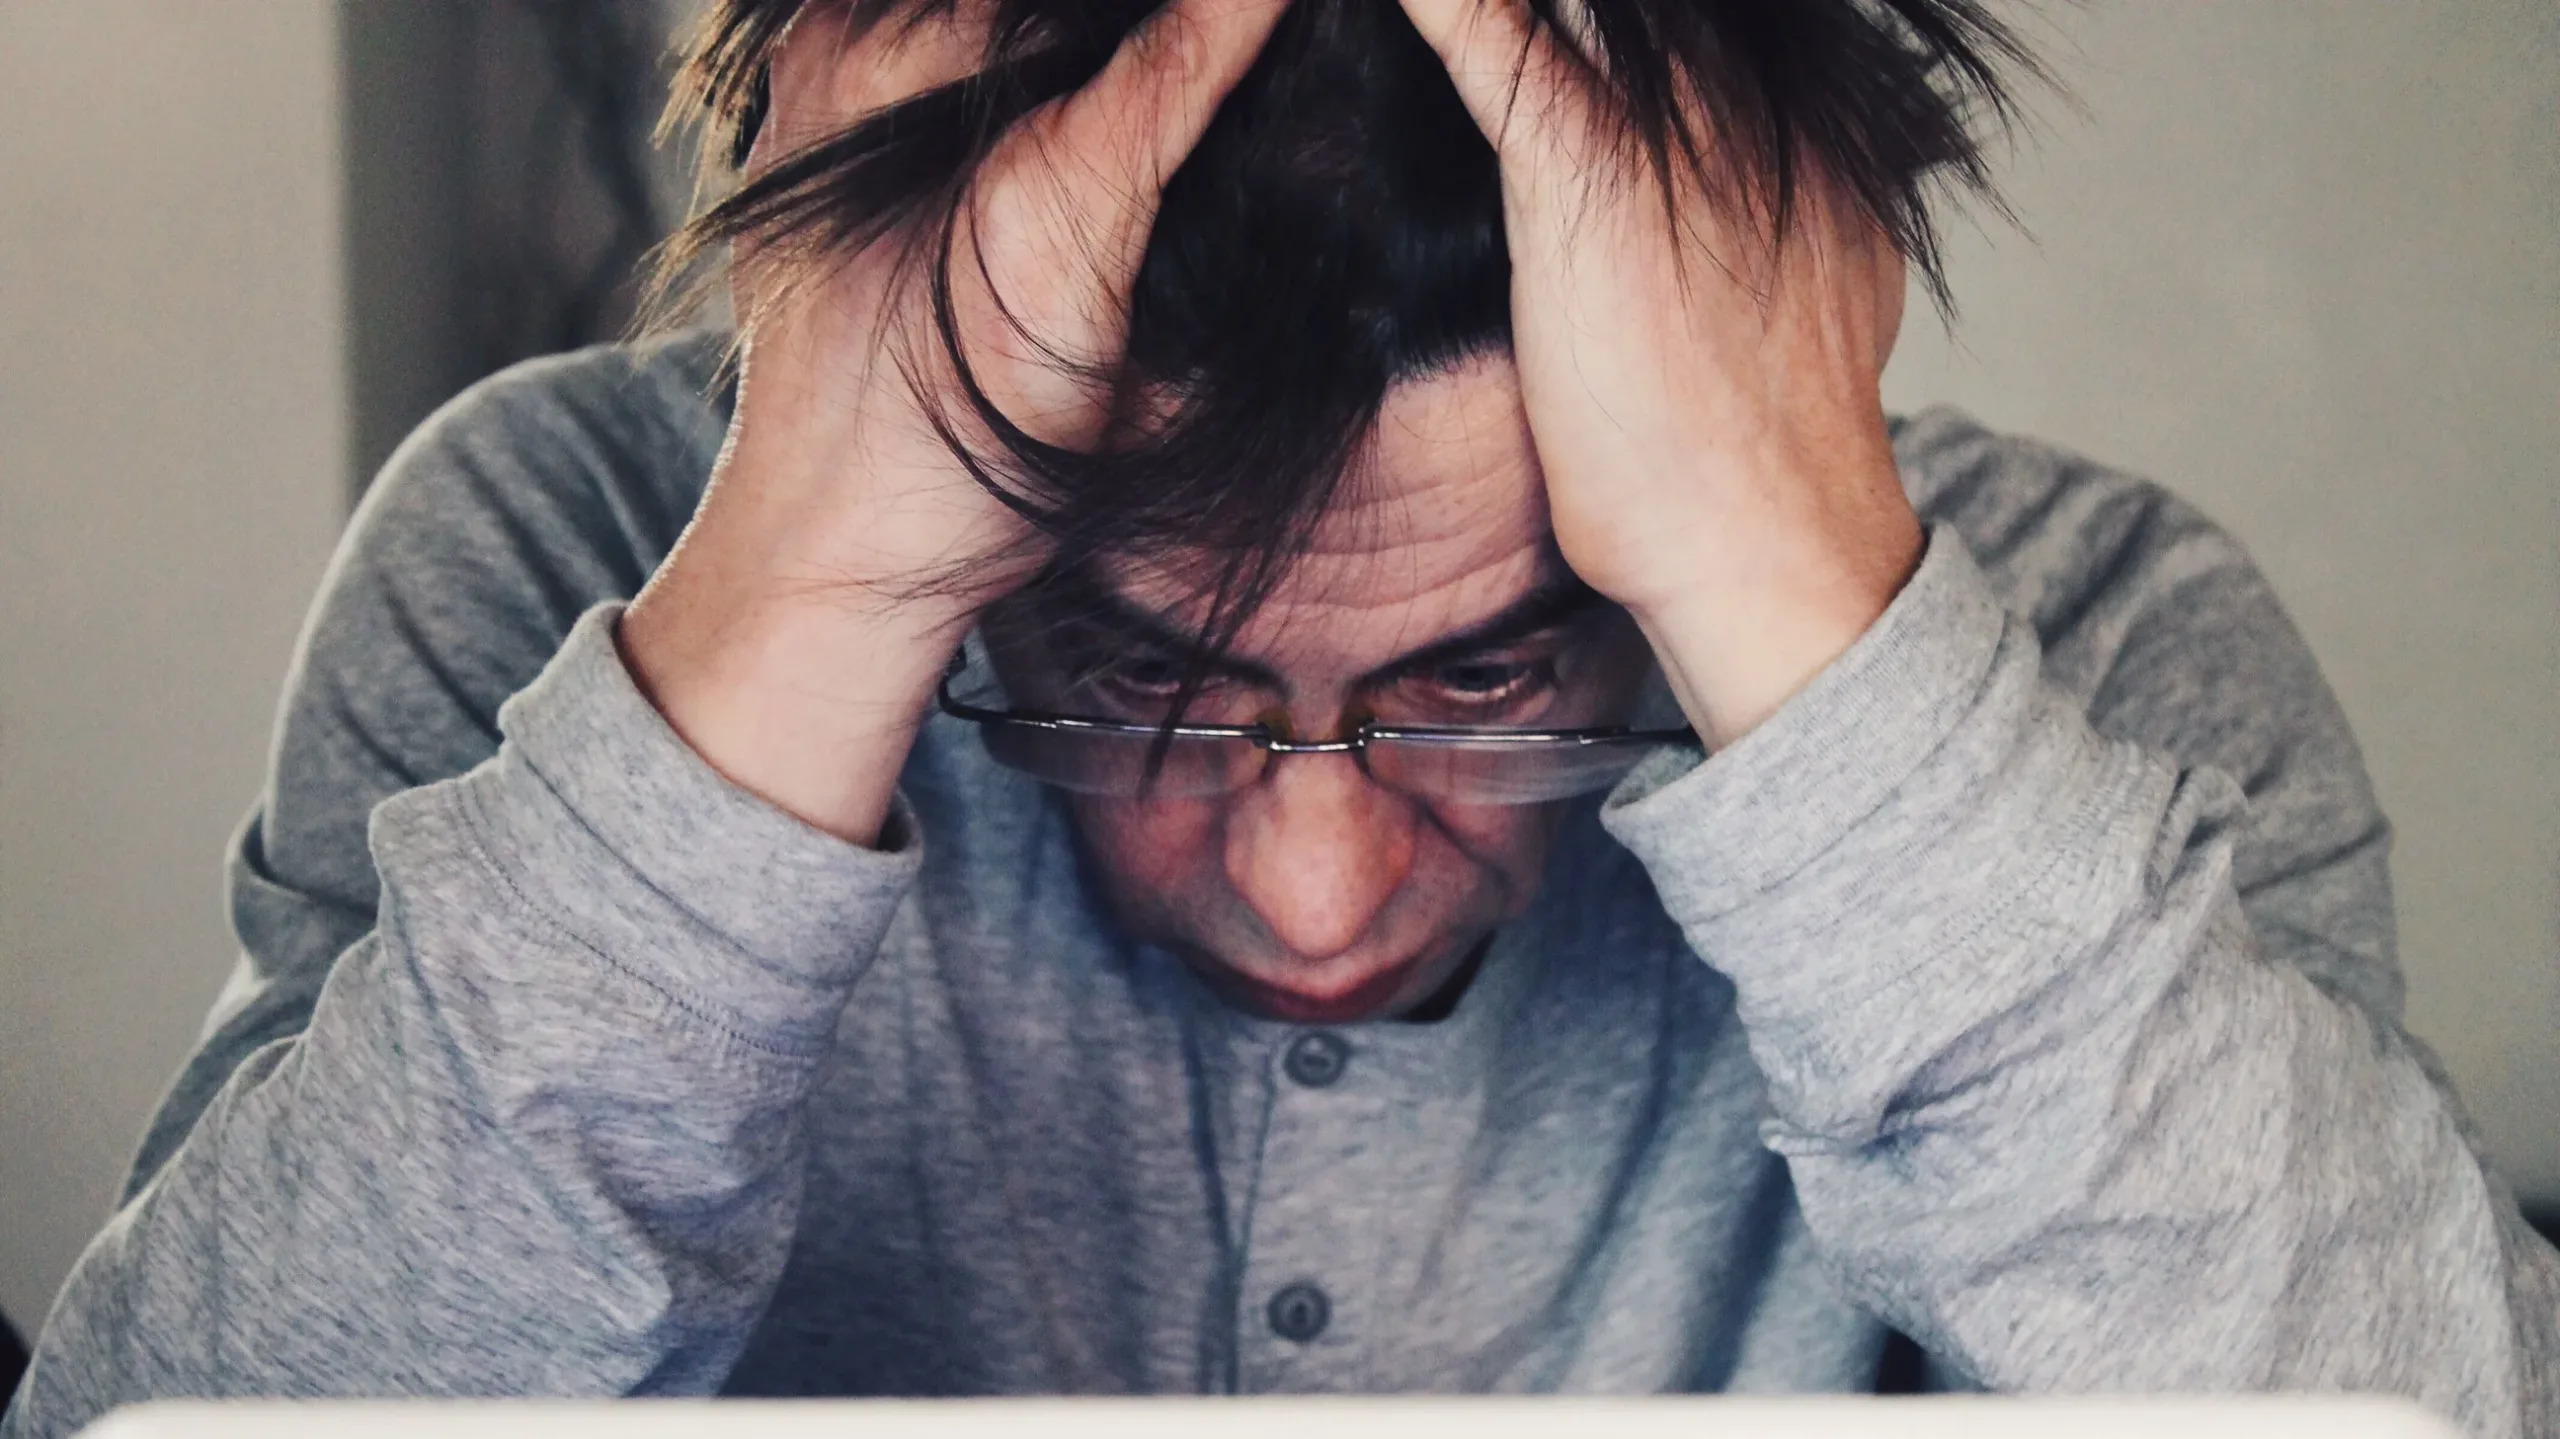 A man holding his head with anxiety expressions on his face.